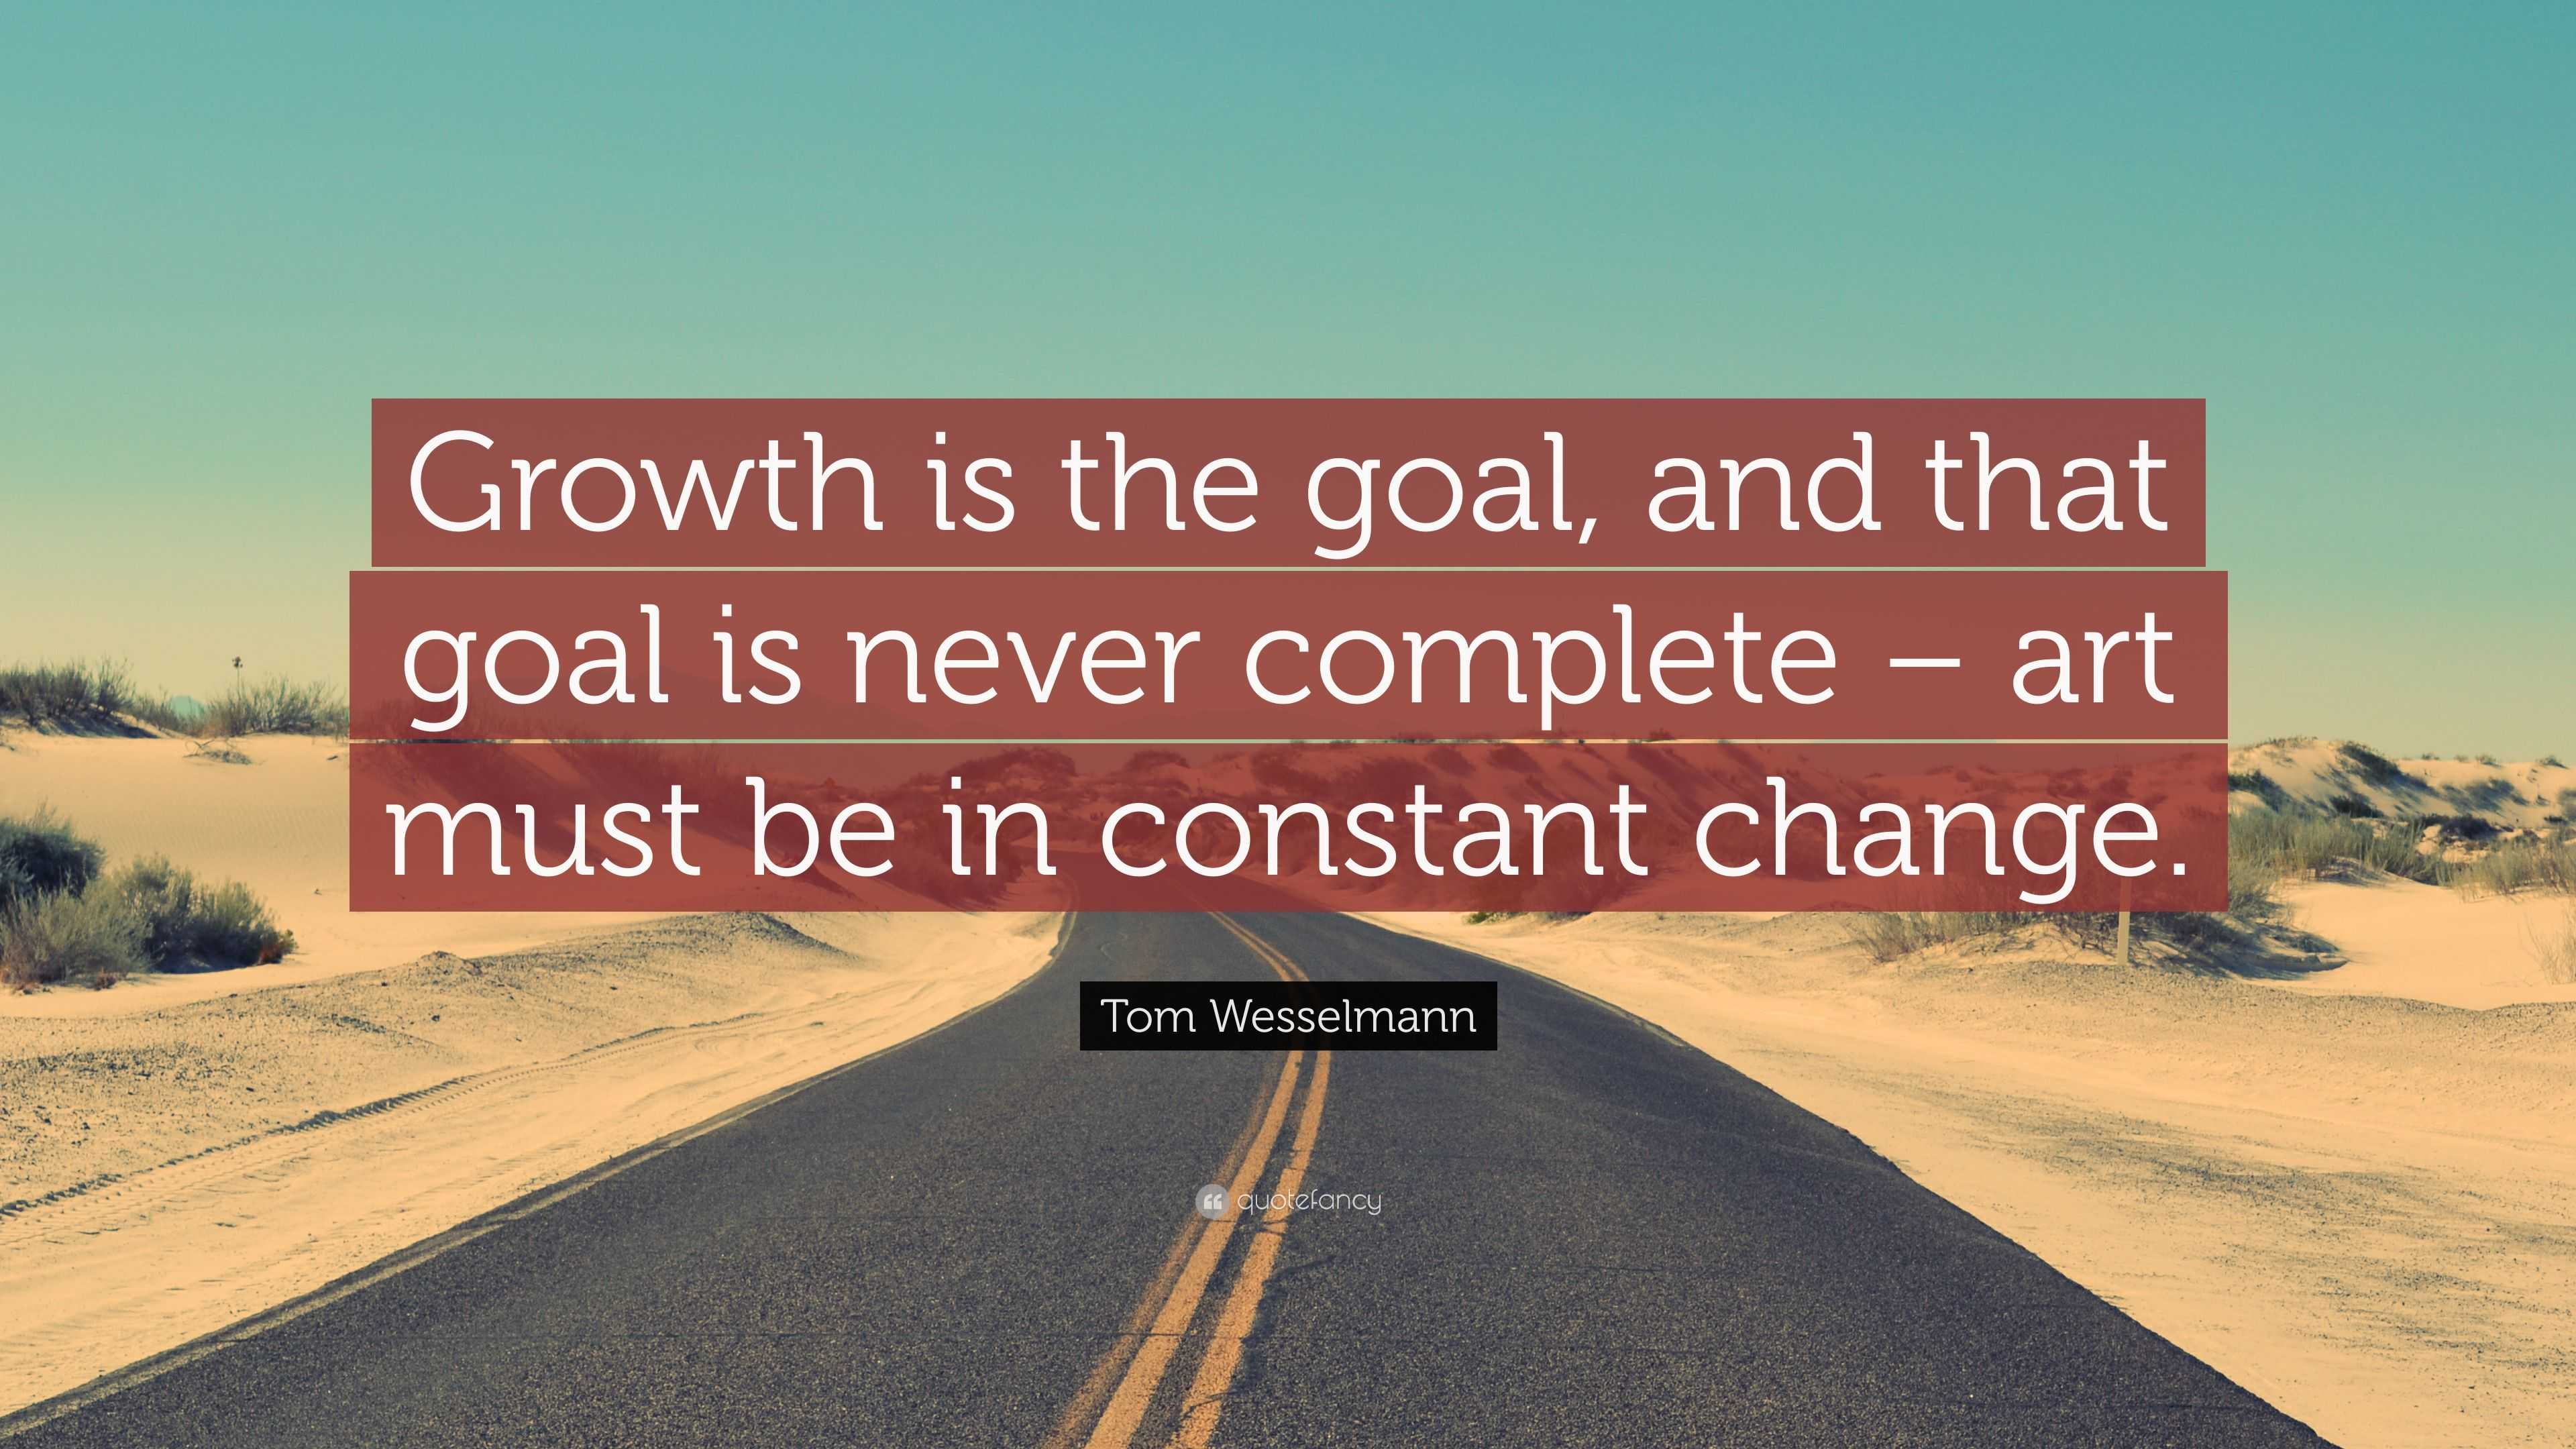 Tom Wesselmann Quote: “Growth is the goal, and that goal is never ...